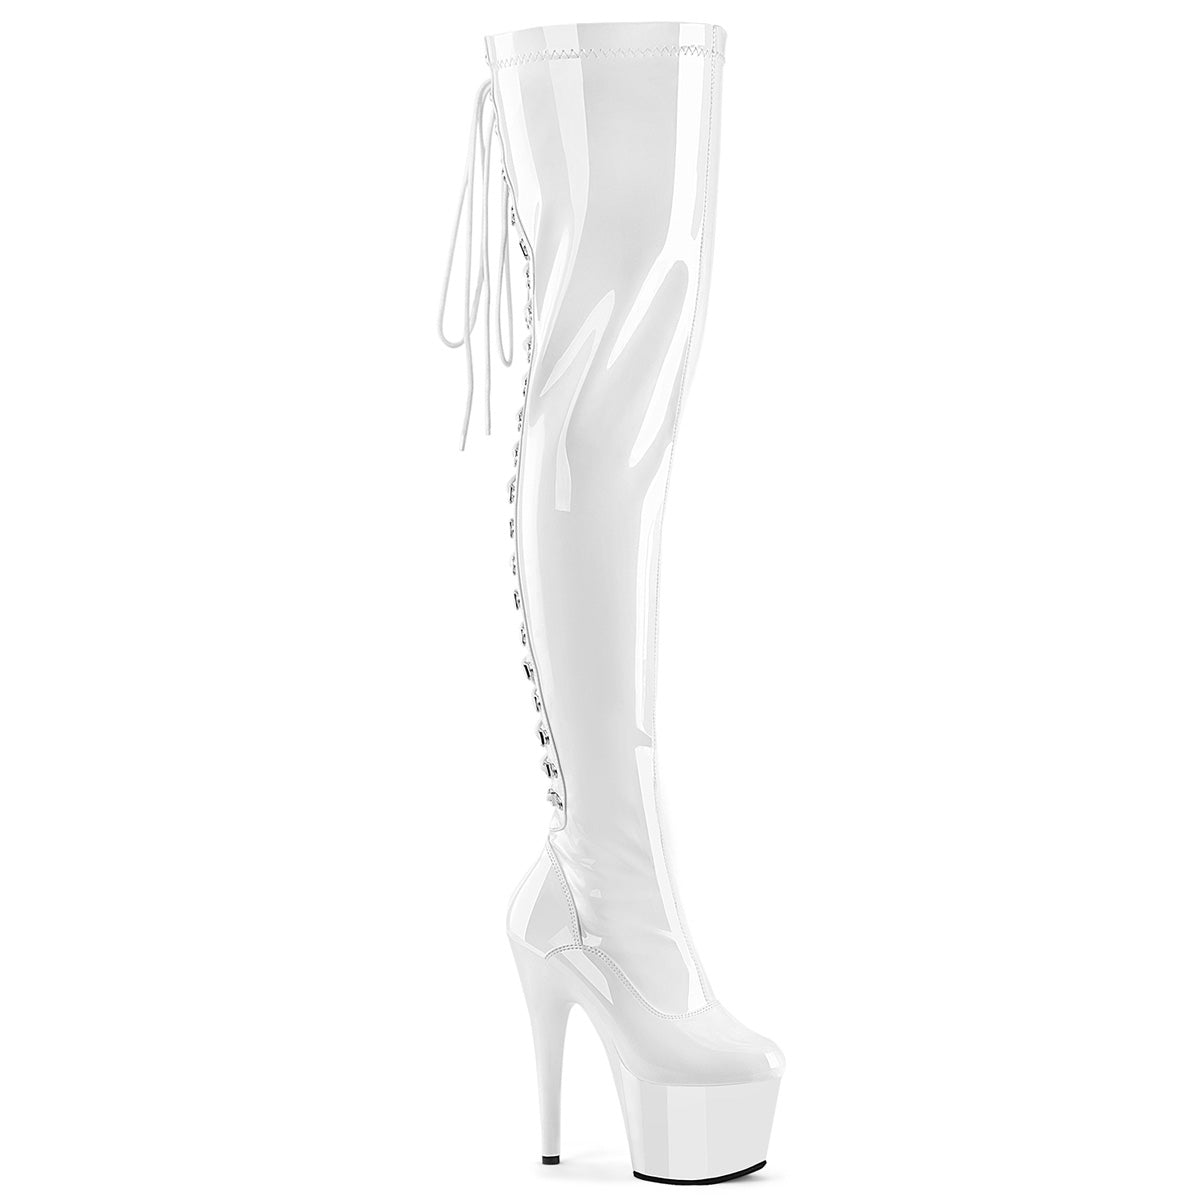 Lace up Thigh High Boots 6 inches DEL3063